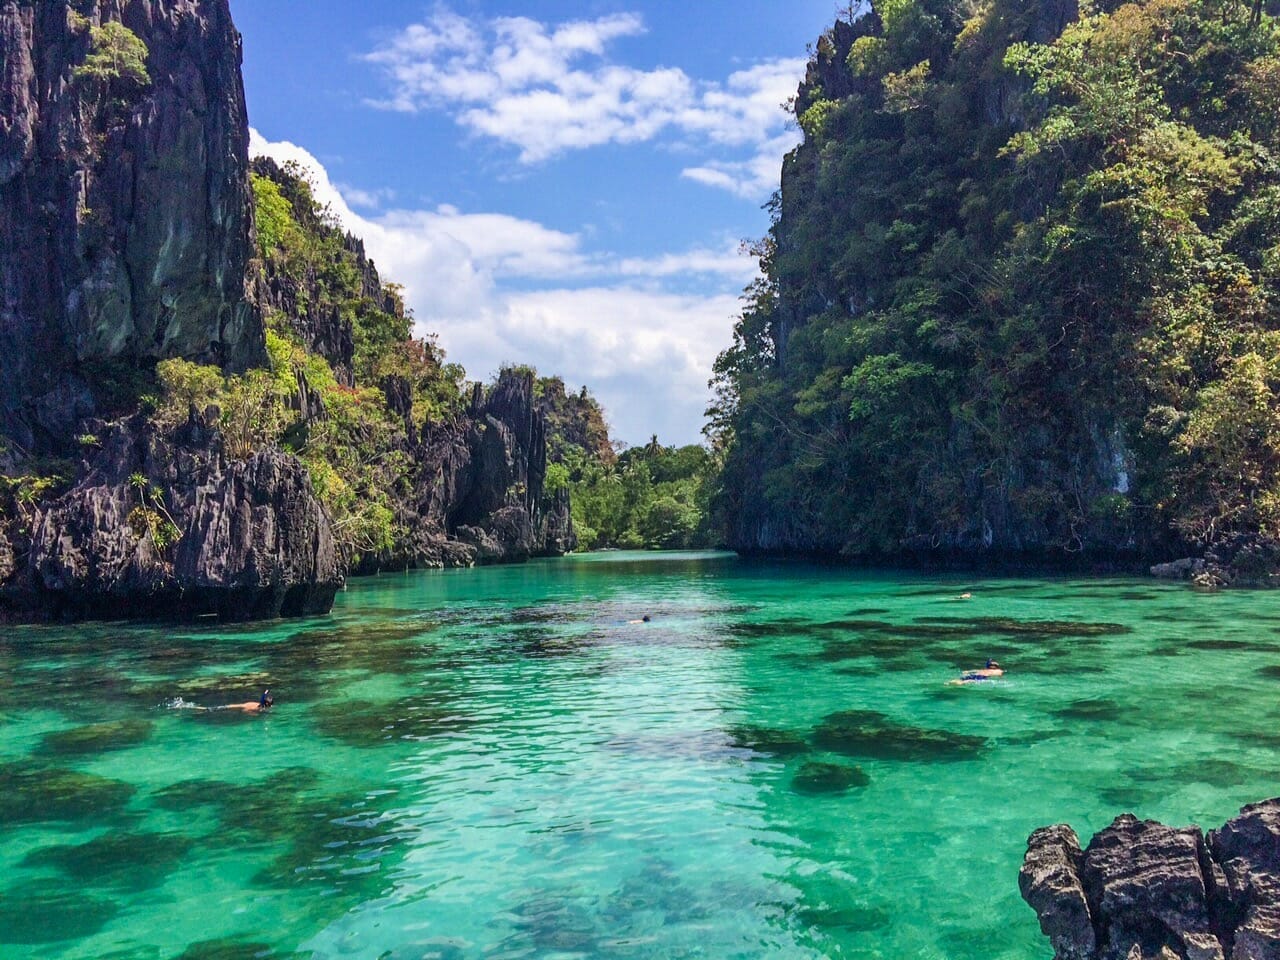 El Nido: one of the most beautiful places in the world things to do in Palawan